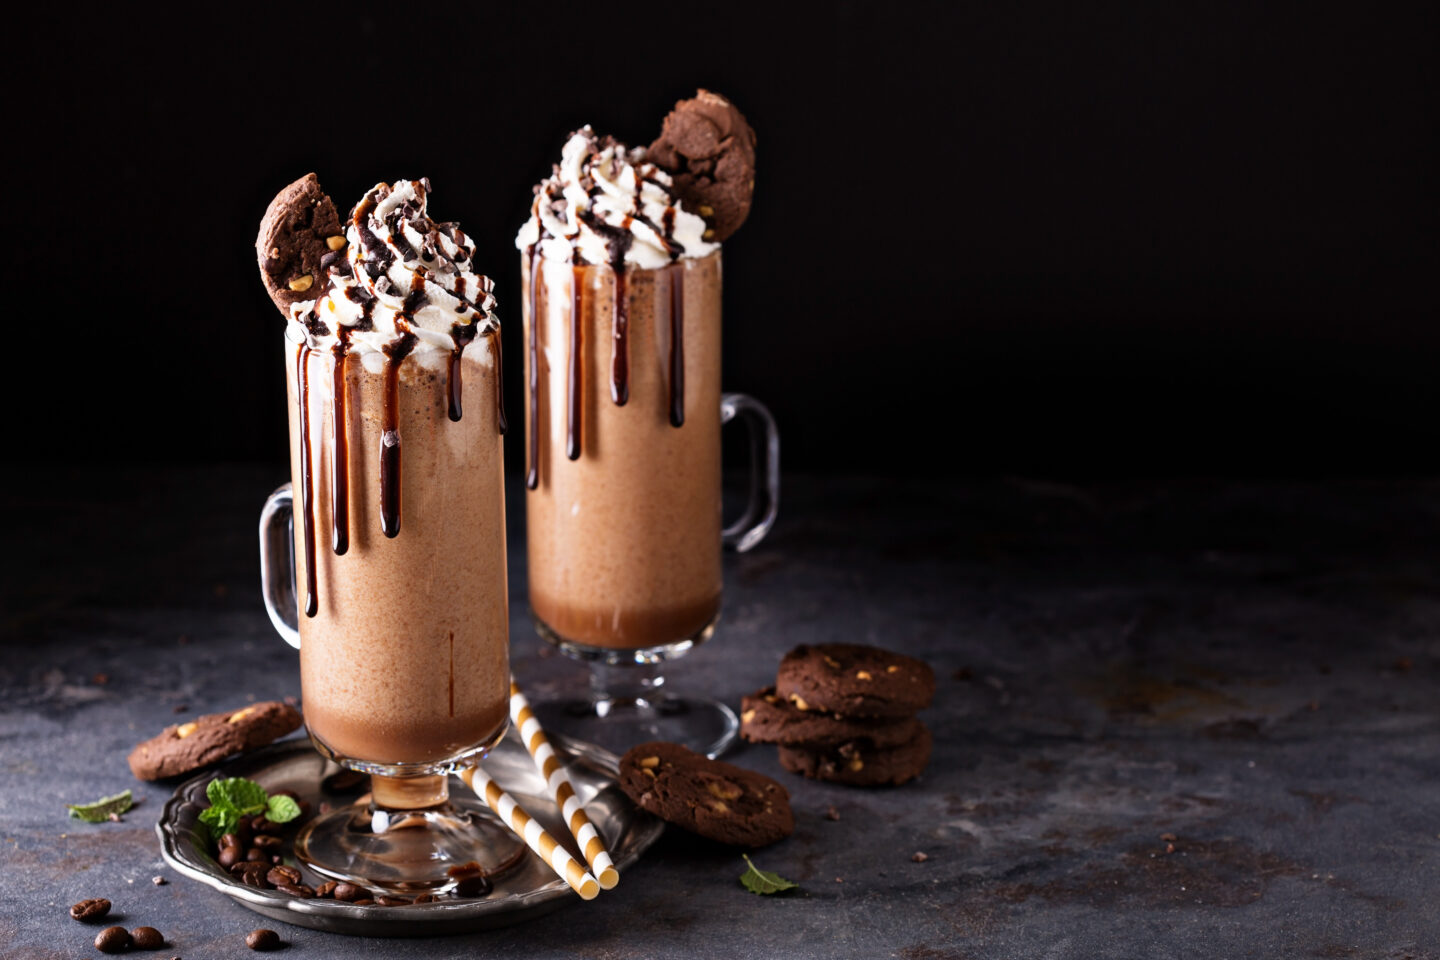 glasses-of-chocolate-frappe-with-dripping-choco-sauce